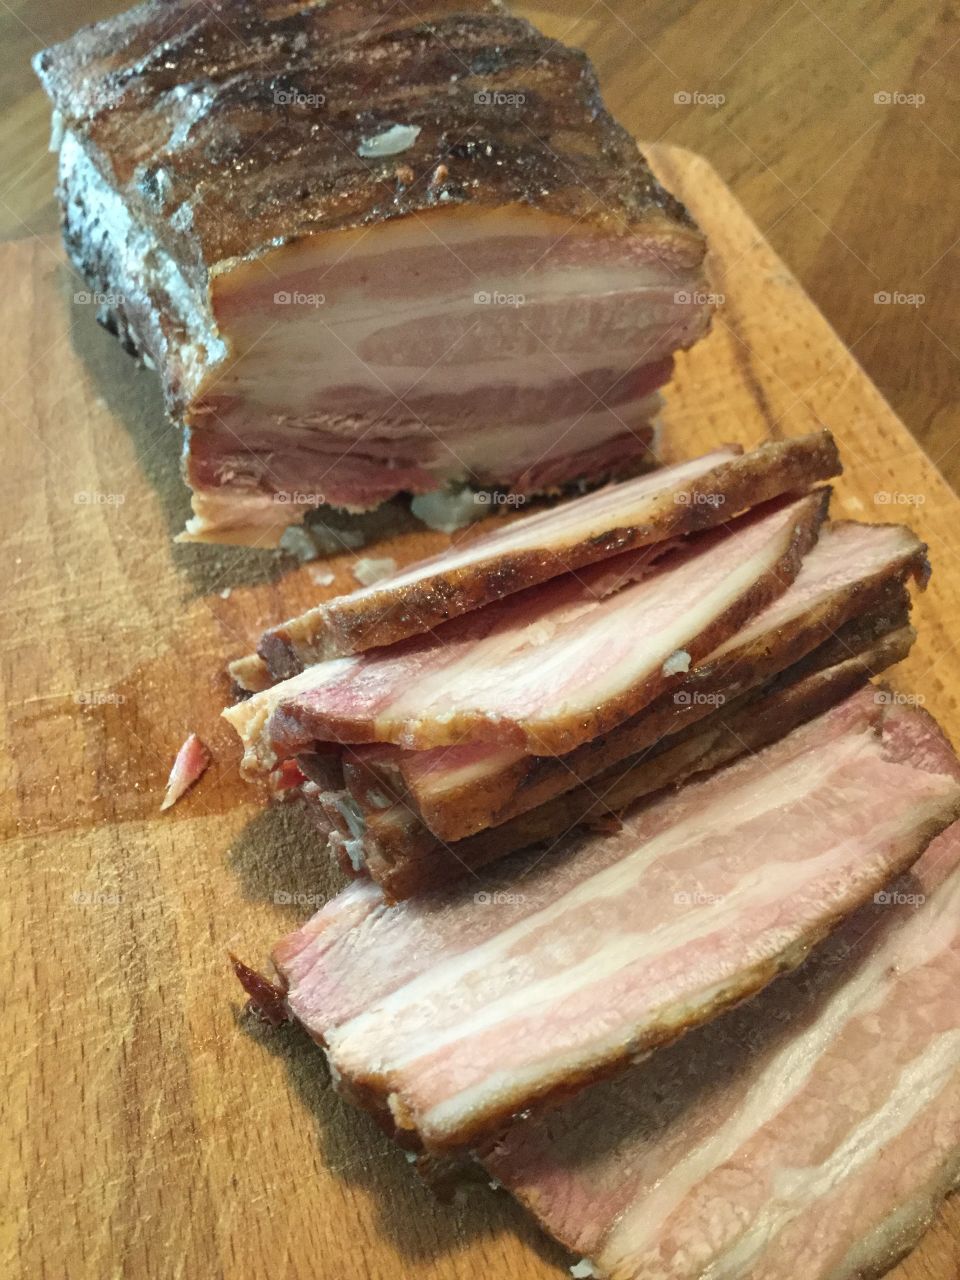 A separate smoked pork, which can be bacon if cut into thin slices.